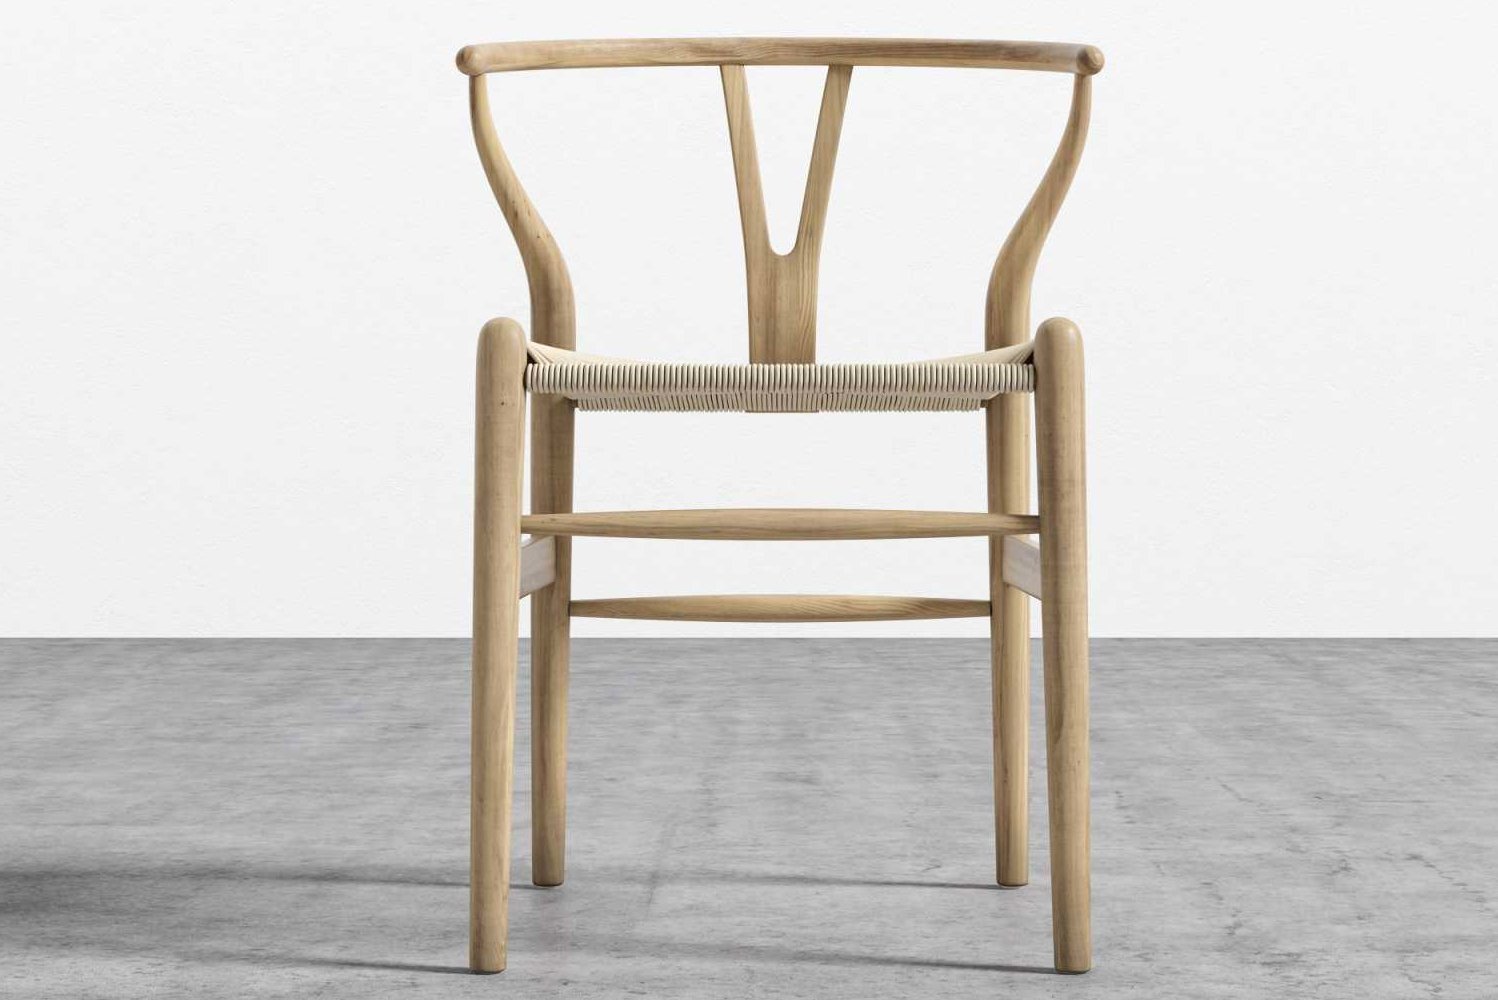 Introducing the Wishbone chair a reproduction of one of the most classic designs from the mid-century modern era 